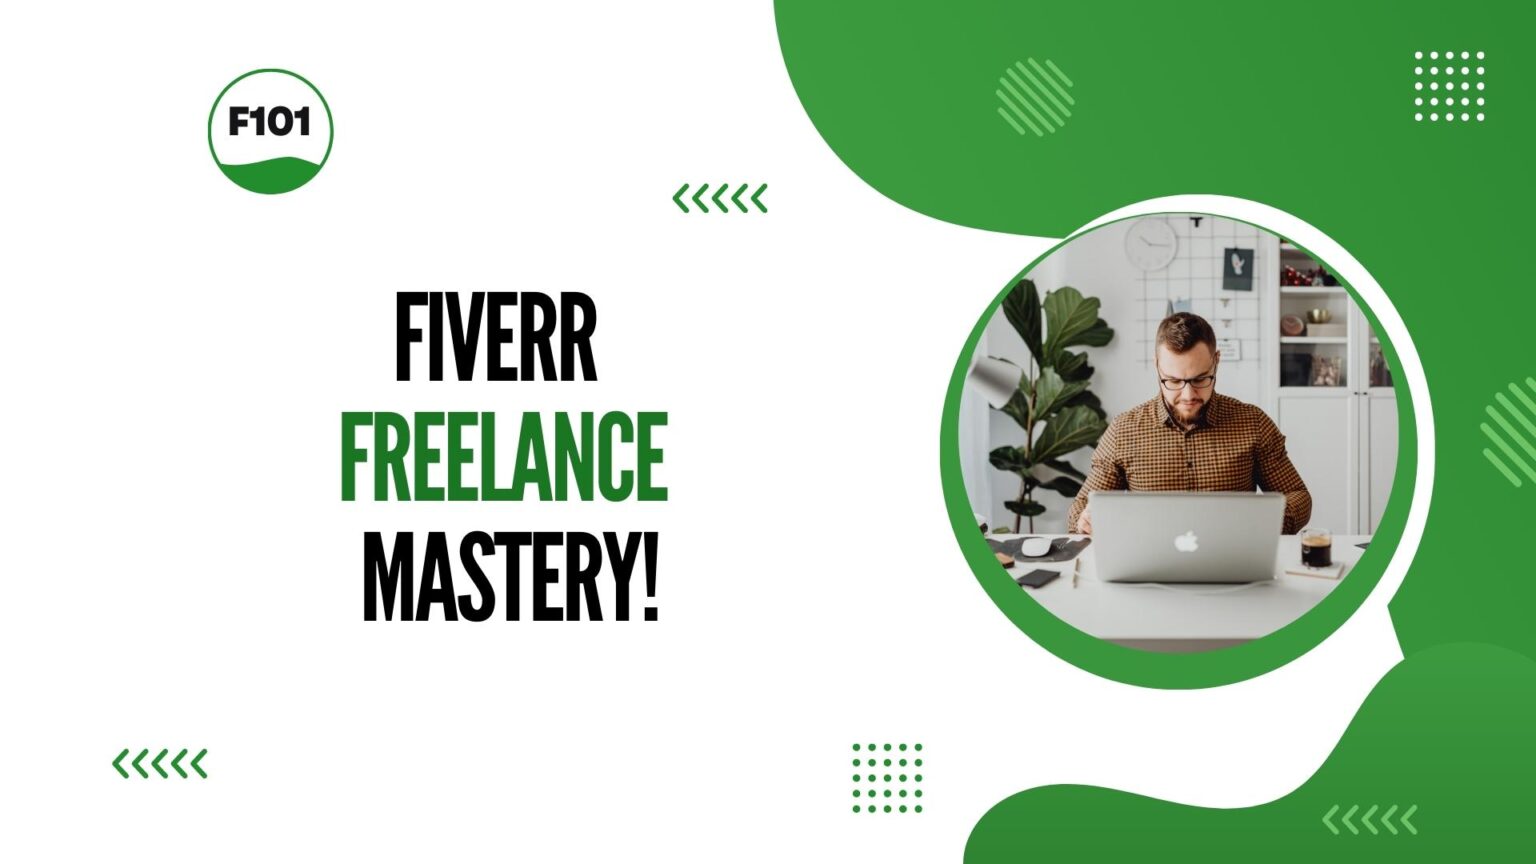 Fiverr Freelance Mastery Strategies For Building A Successful Business